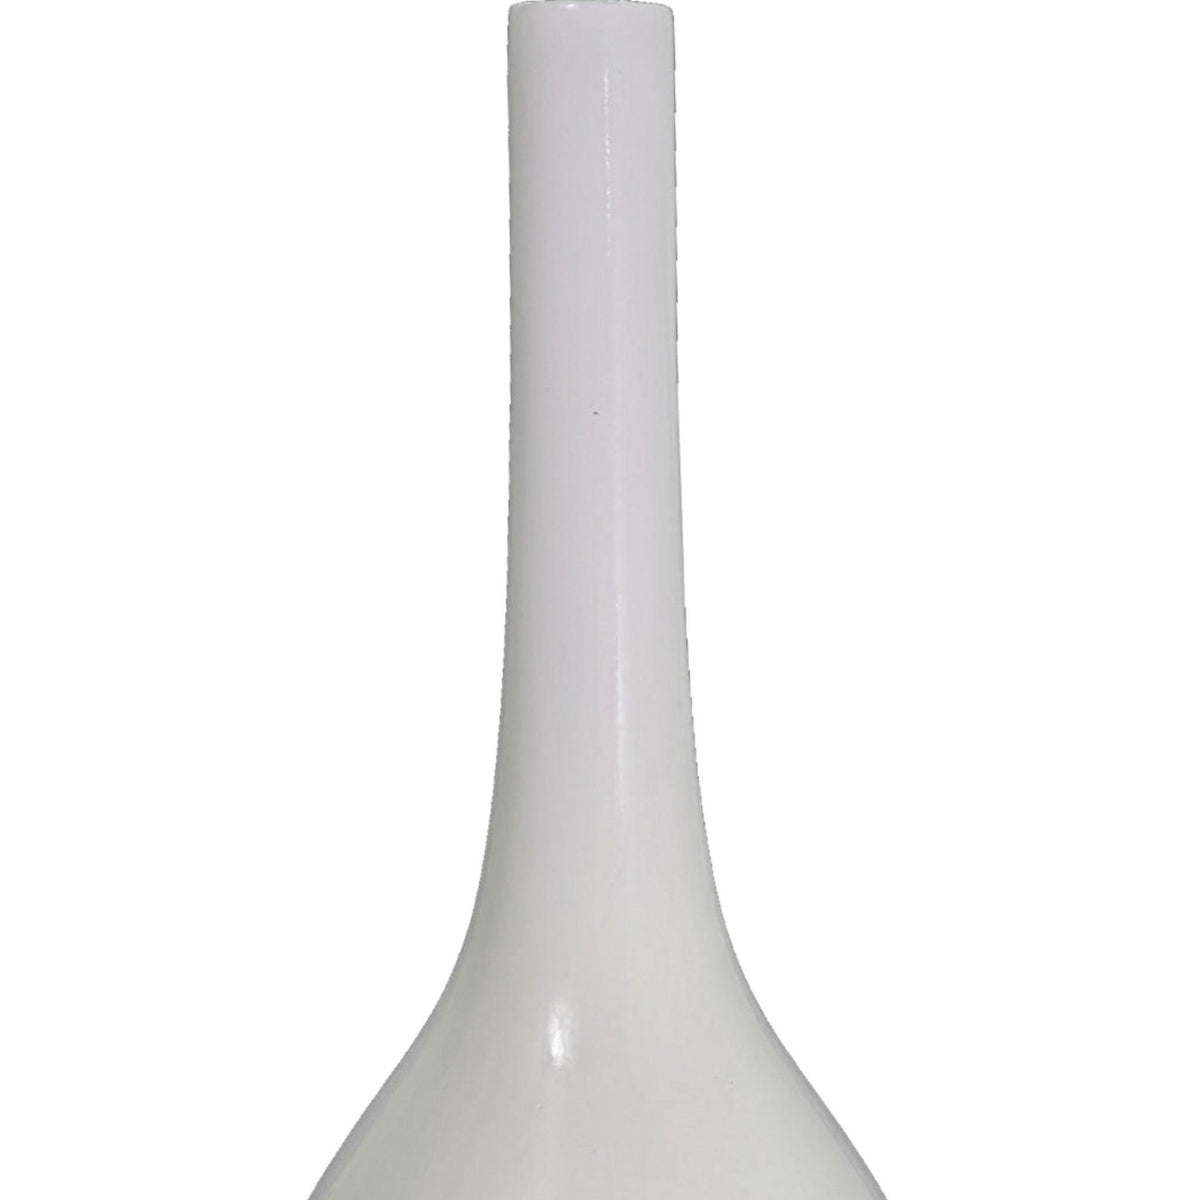 Lee Display's brand new 20in Roman Ceramic Vase comes in a high gloss white finish on sale at leedisplay.com